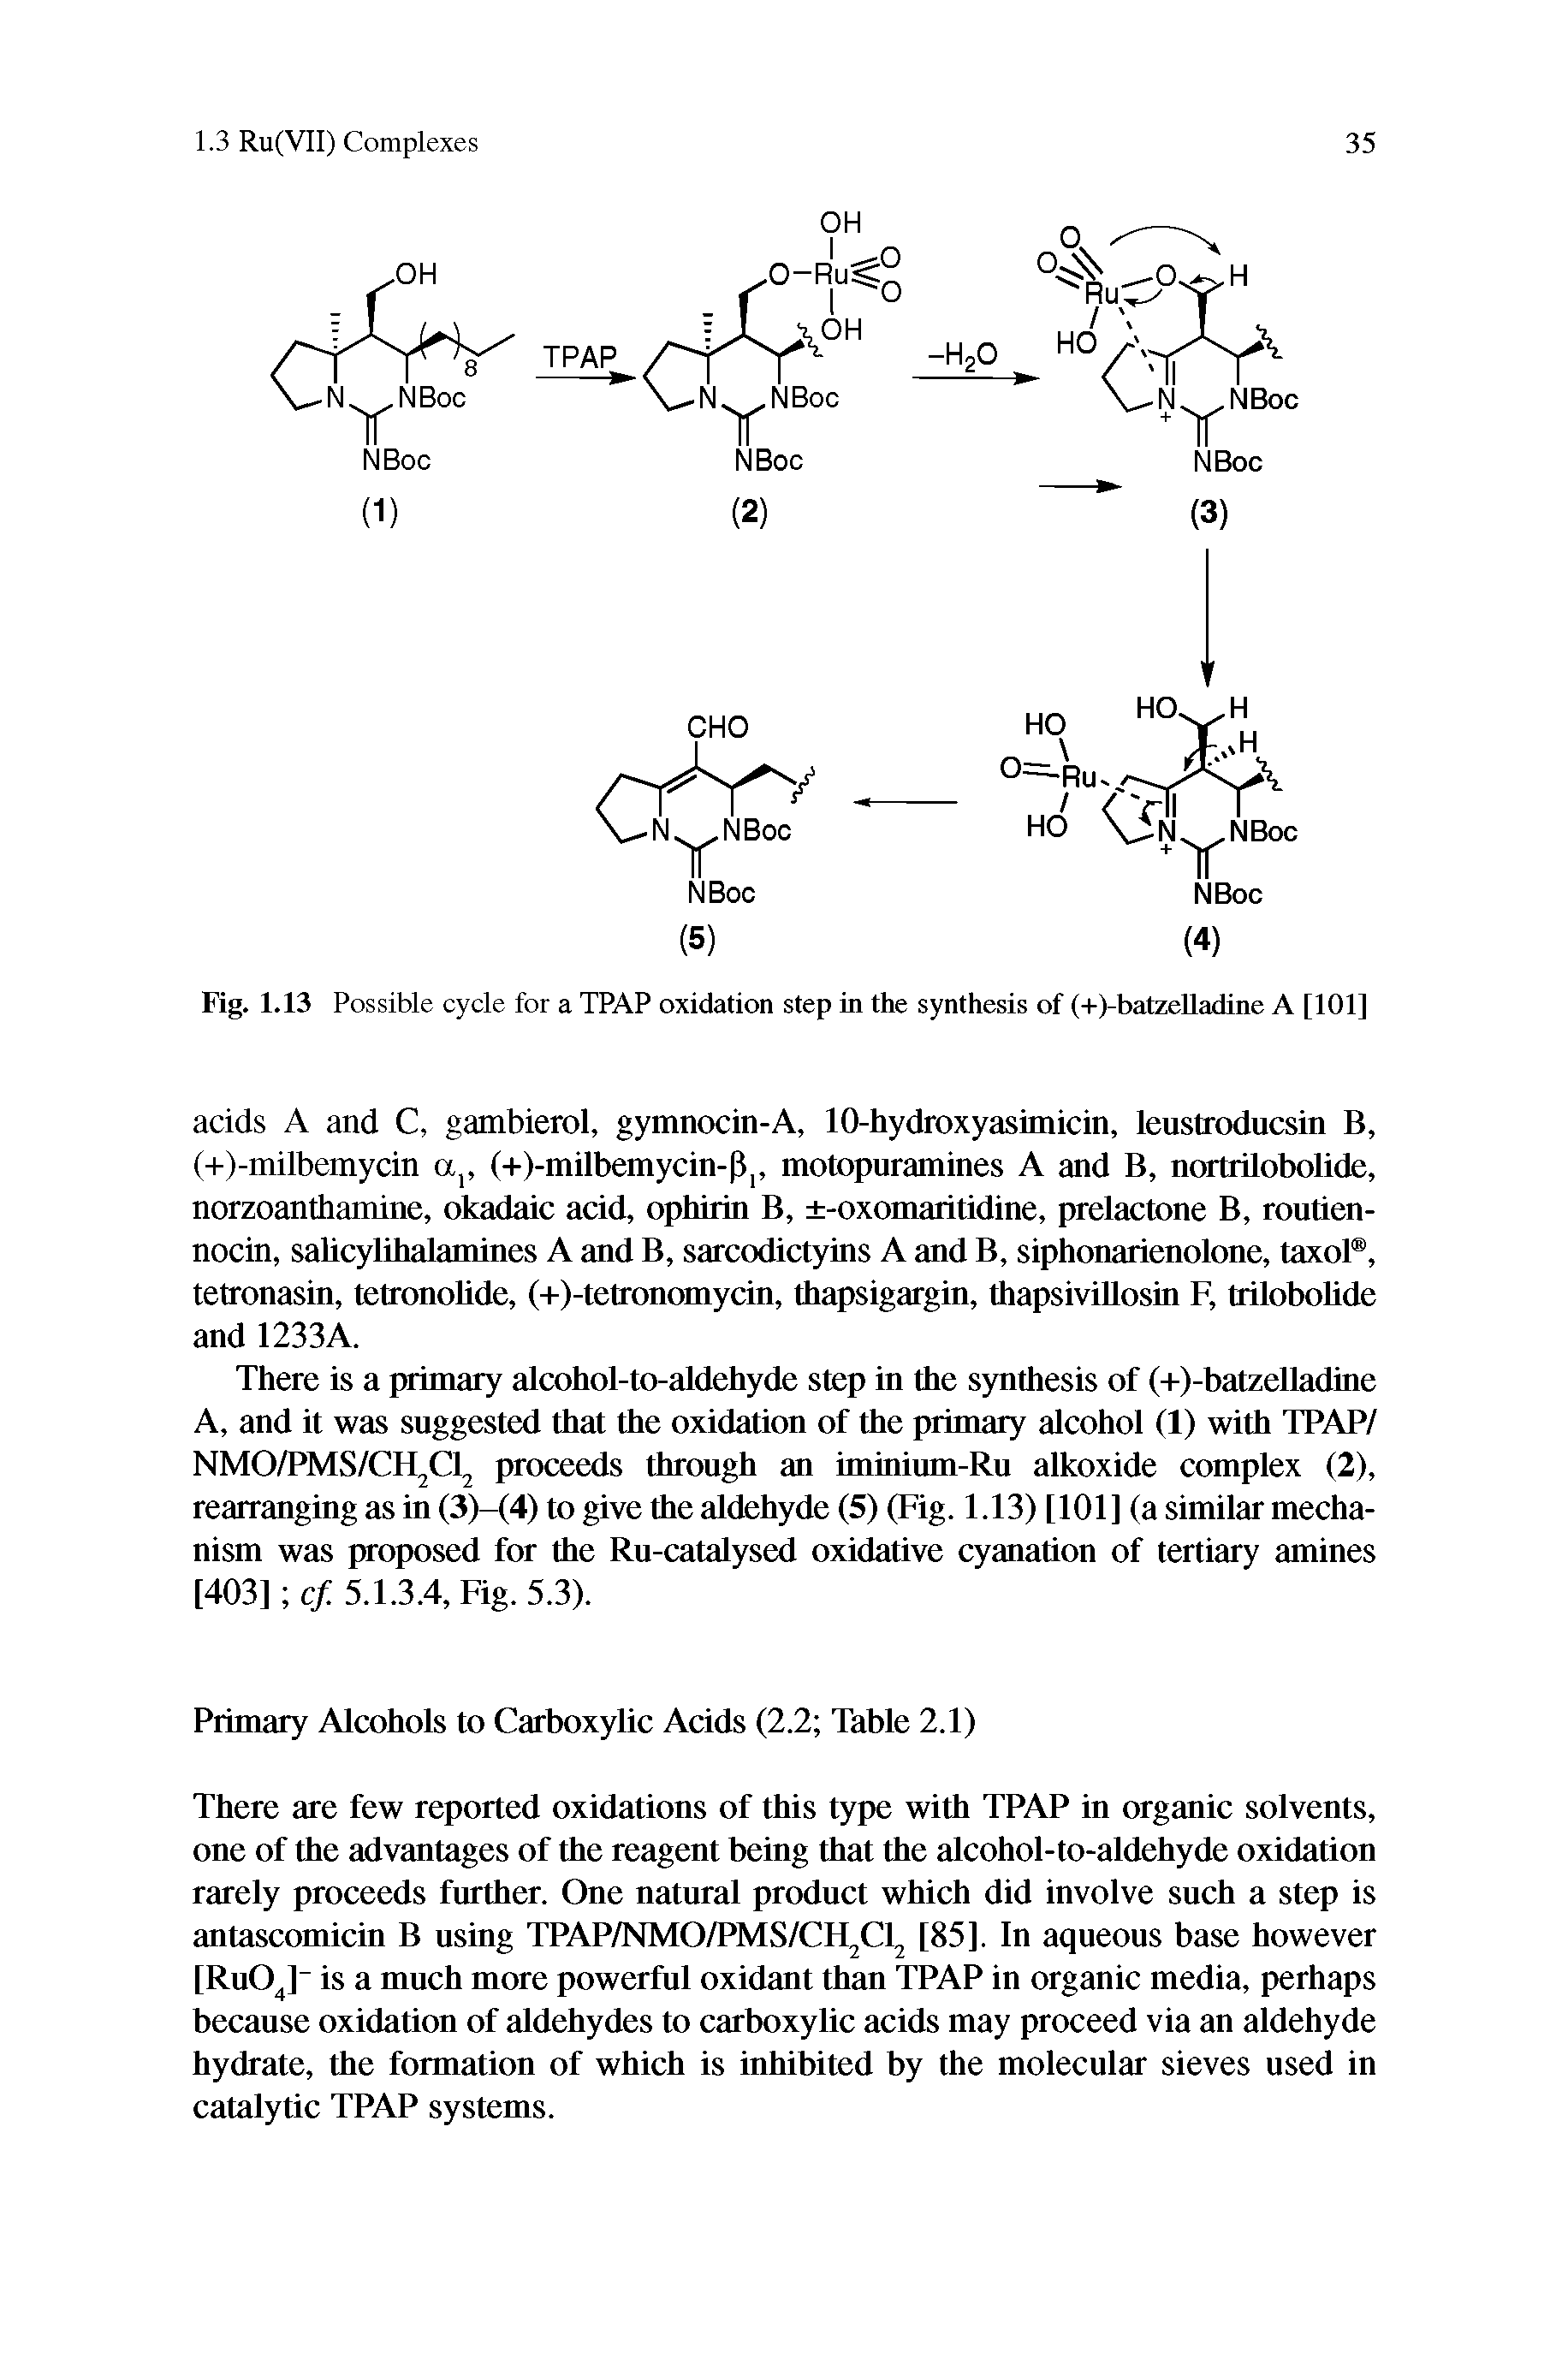 Fig. 1.13 Possible cycle for a TPAP oxidation step in the synthesis of (+)-batzeUadine A [101]...